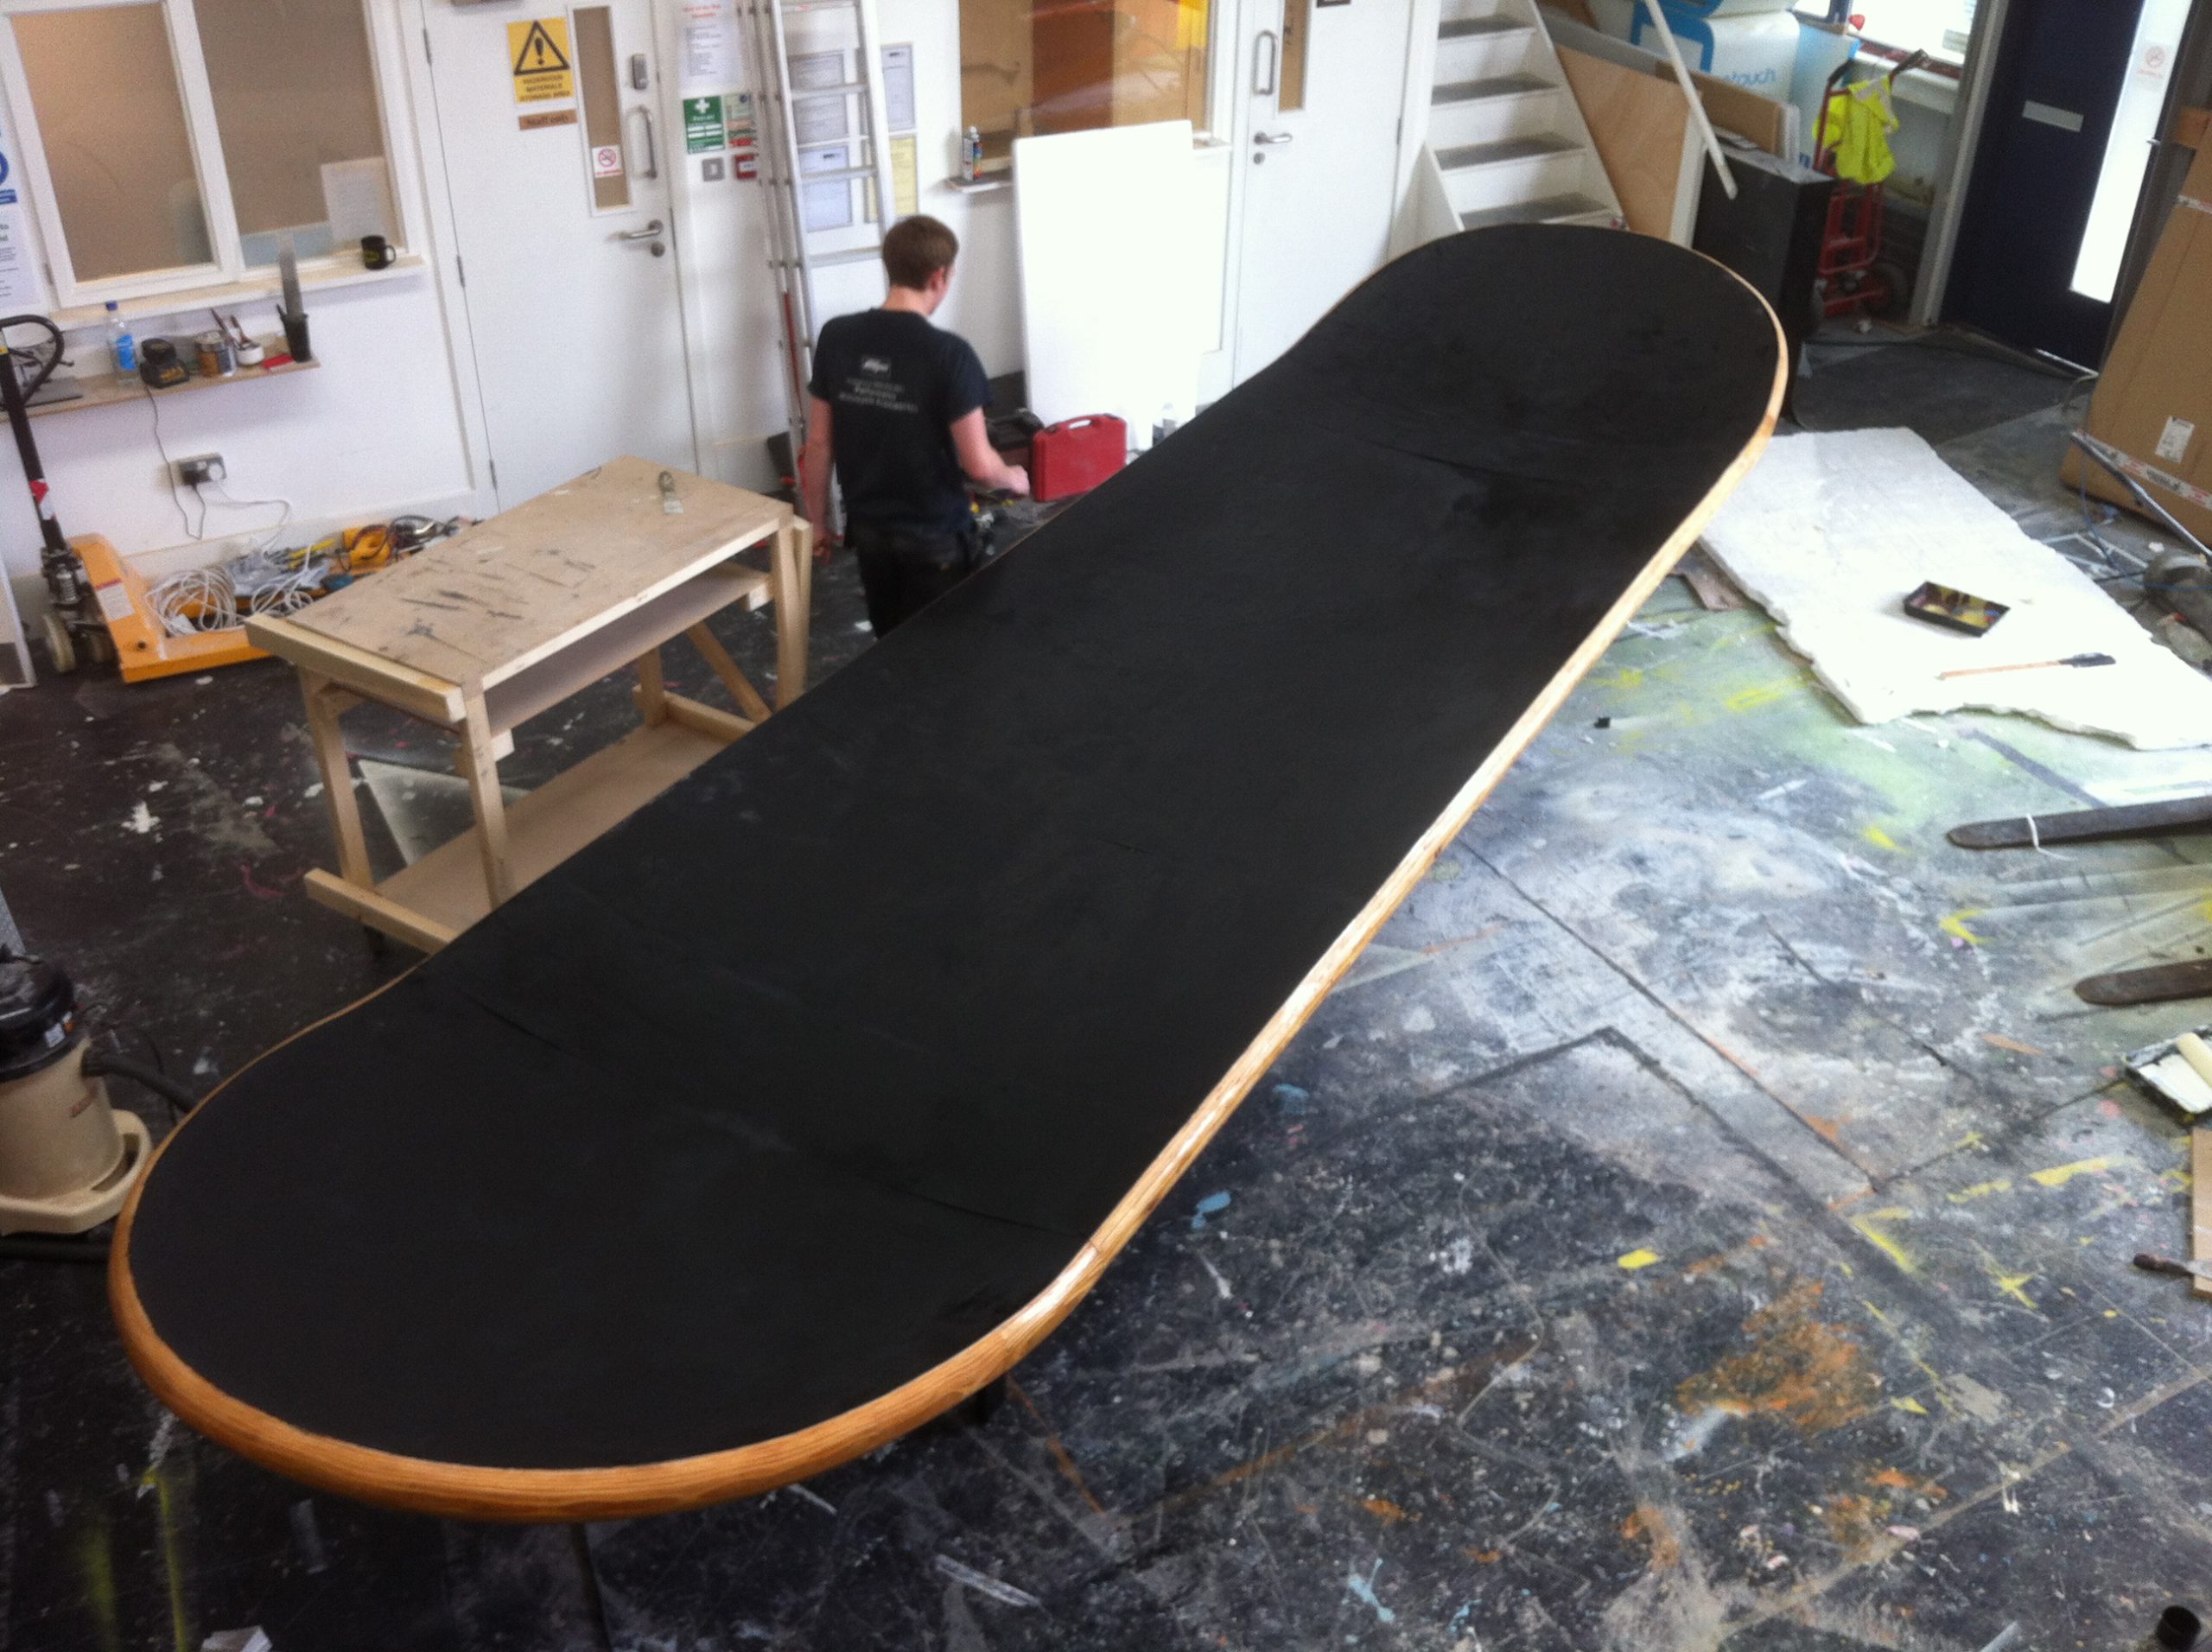 A model of a large skateboard